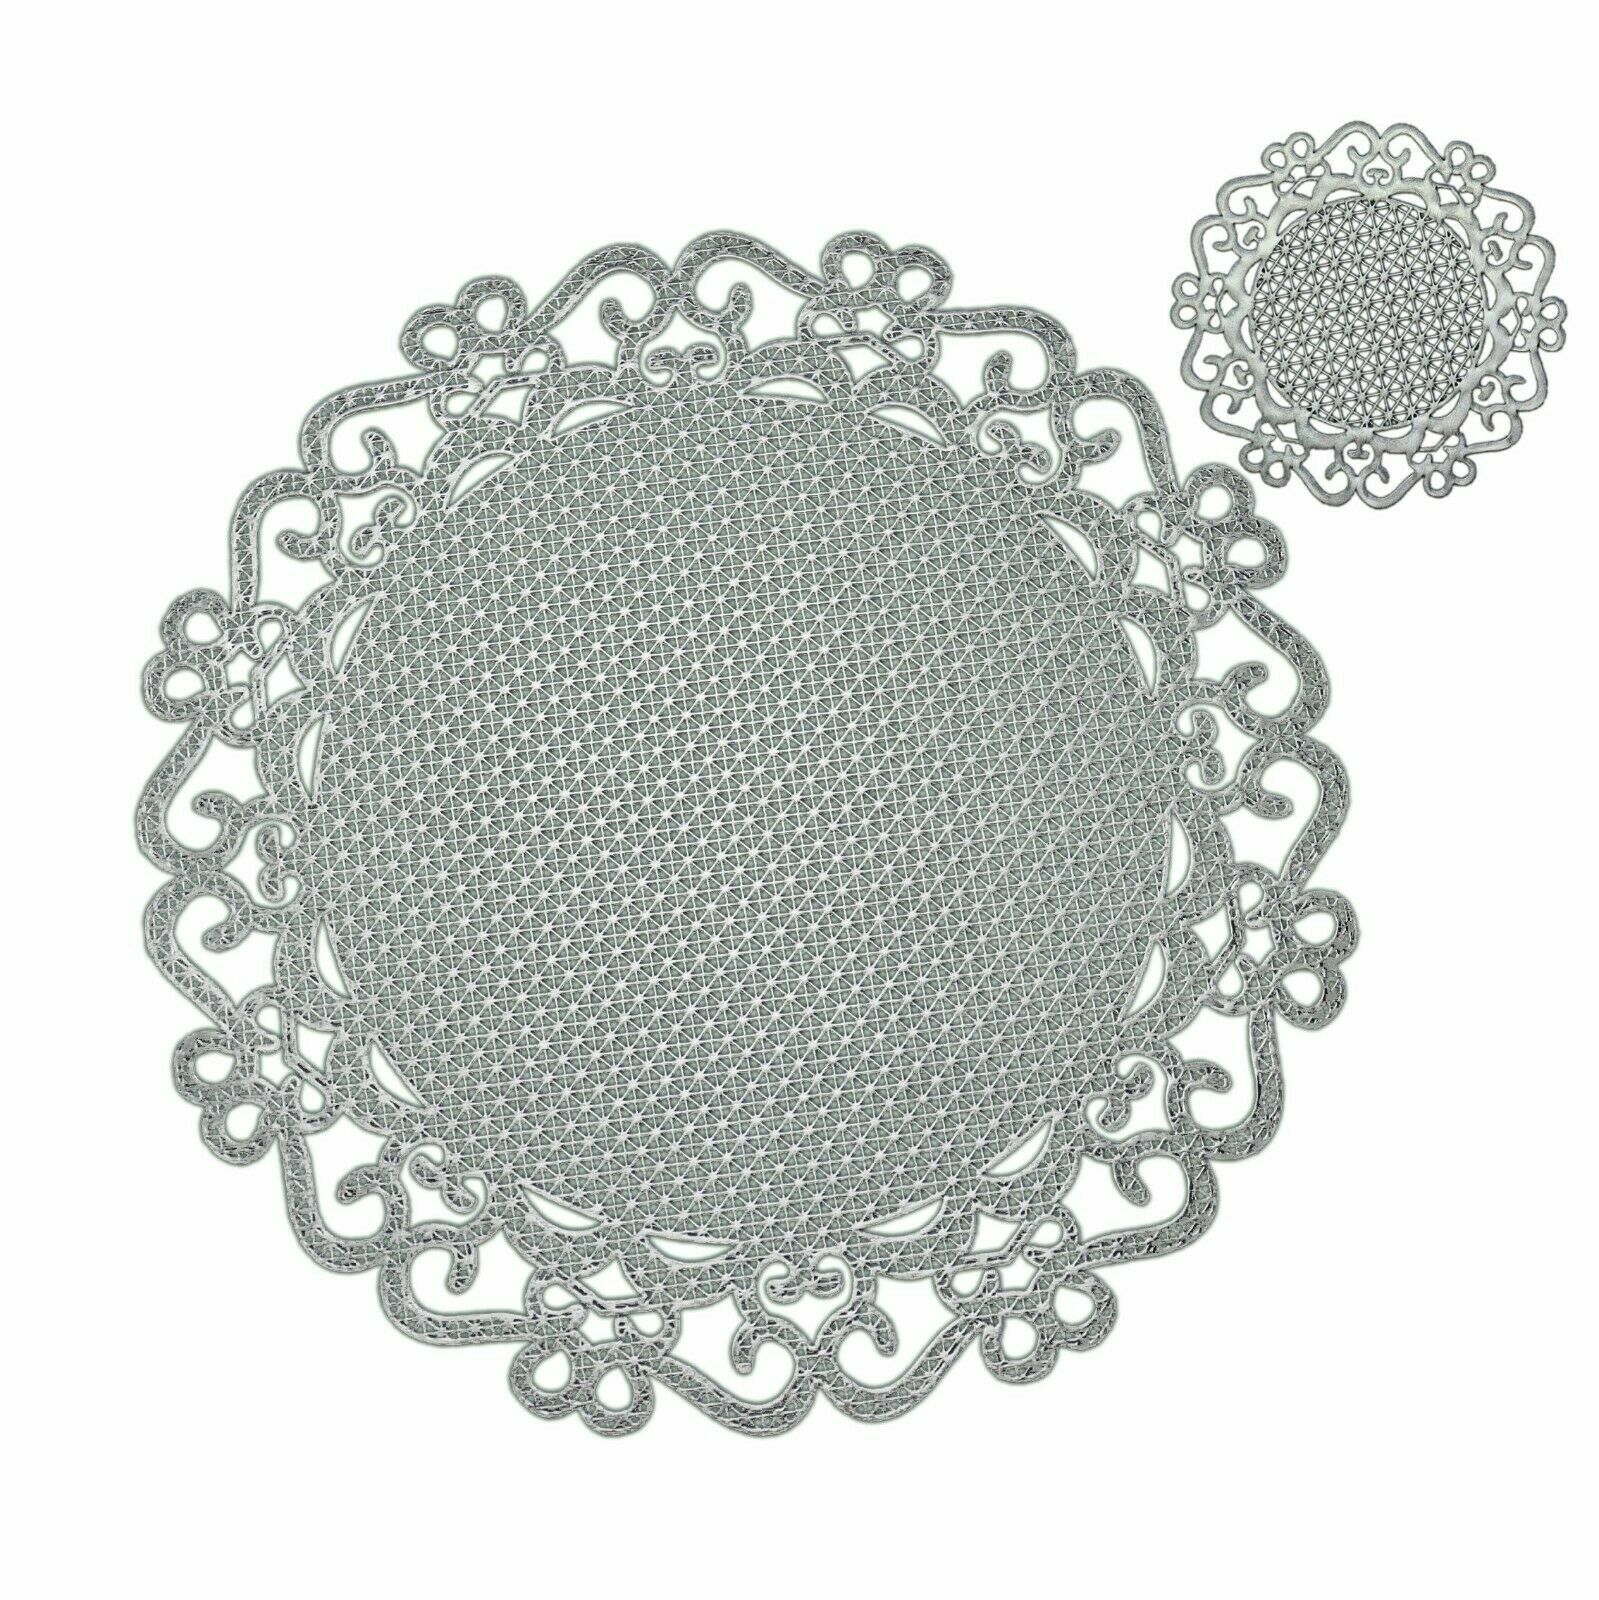 Set of 4 Silver Washable Round Placemats and Coasters for Cups Plates Cutlery Dining Table Set